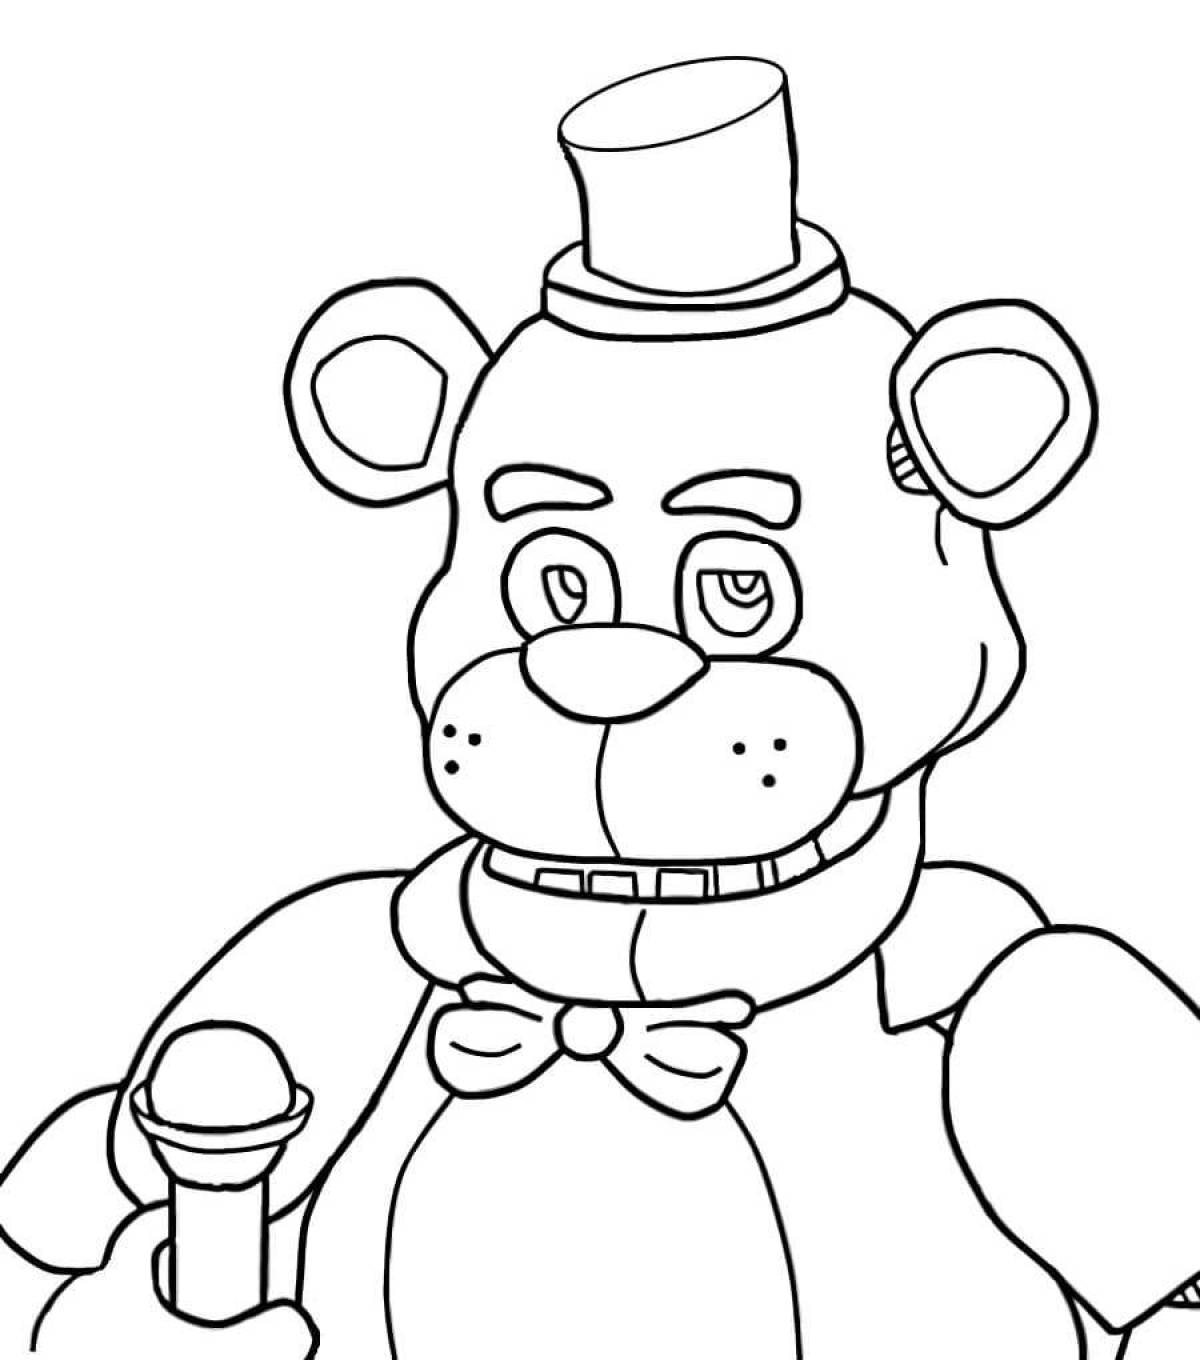 Gorgeous freddy coloring book